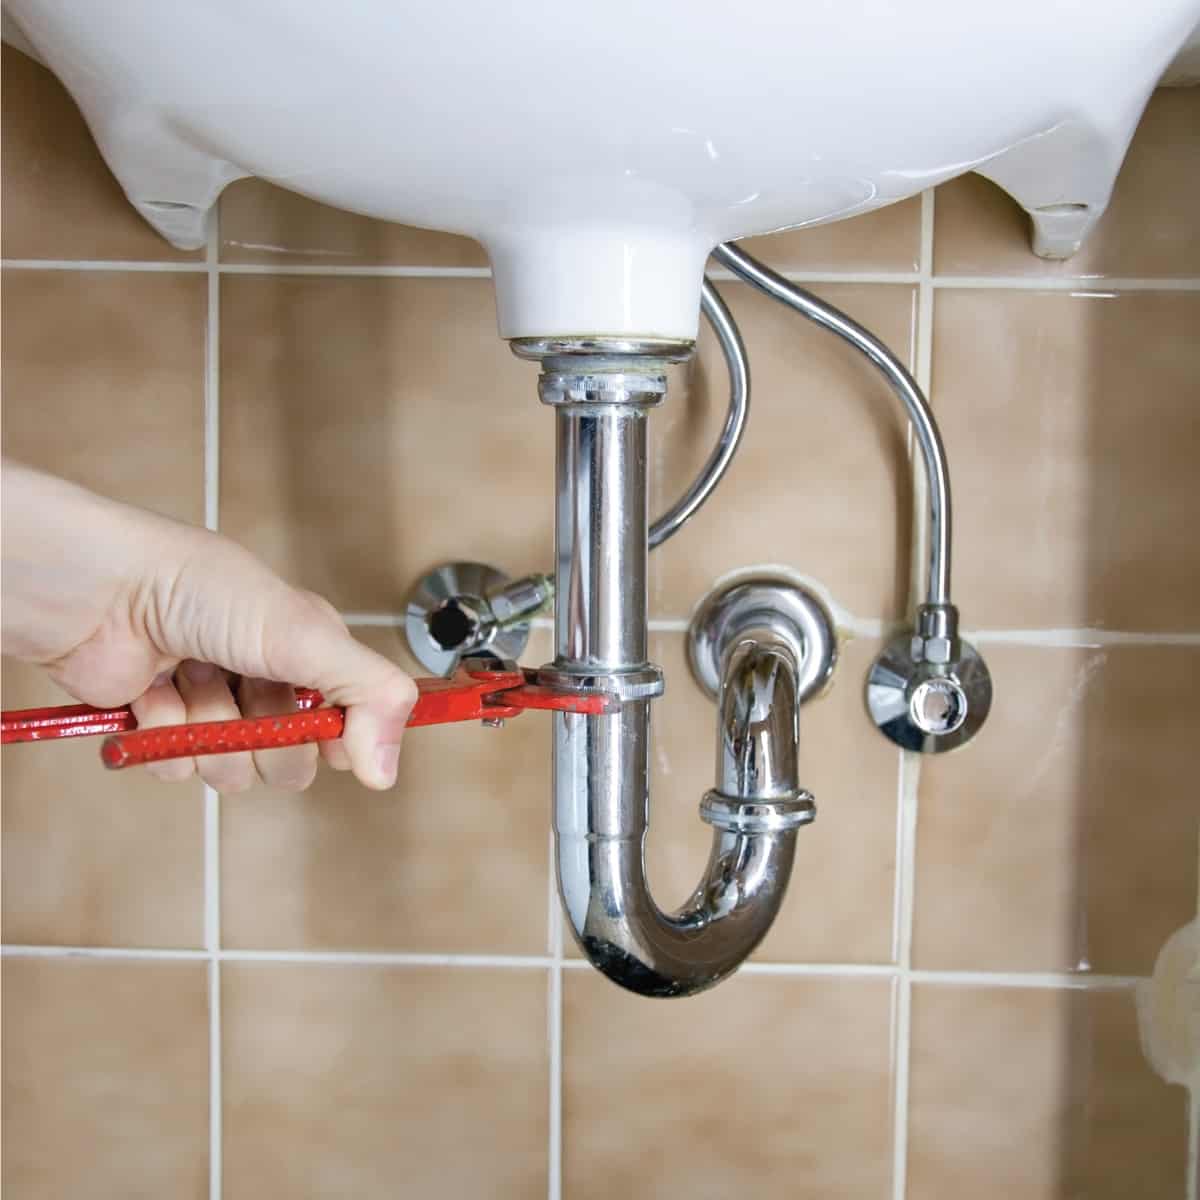 plumber with wrench loosening drain on a sink